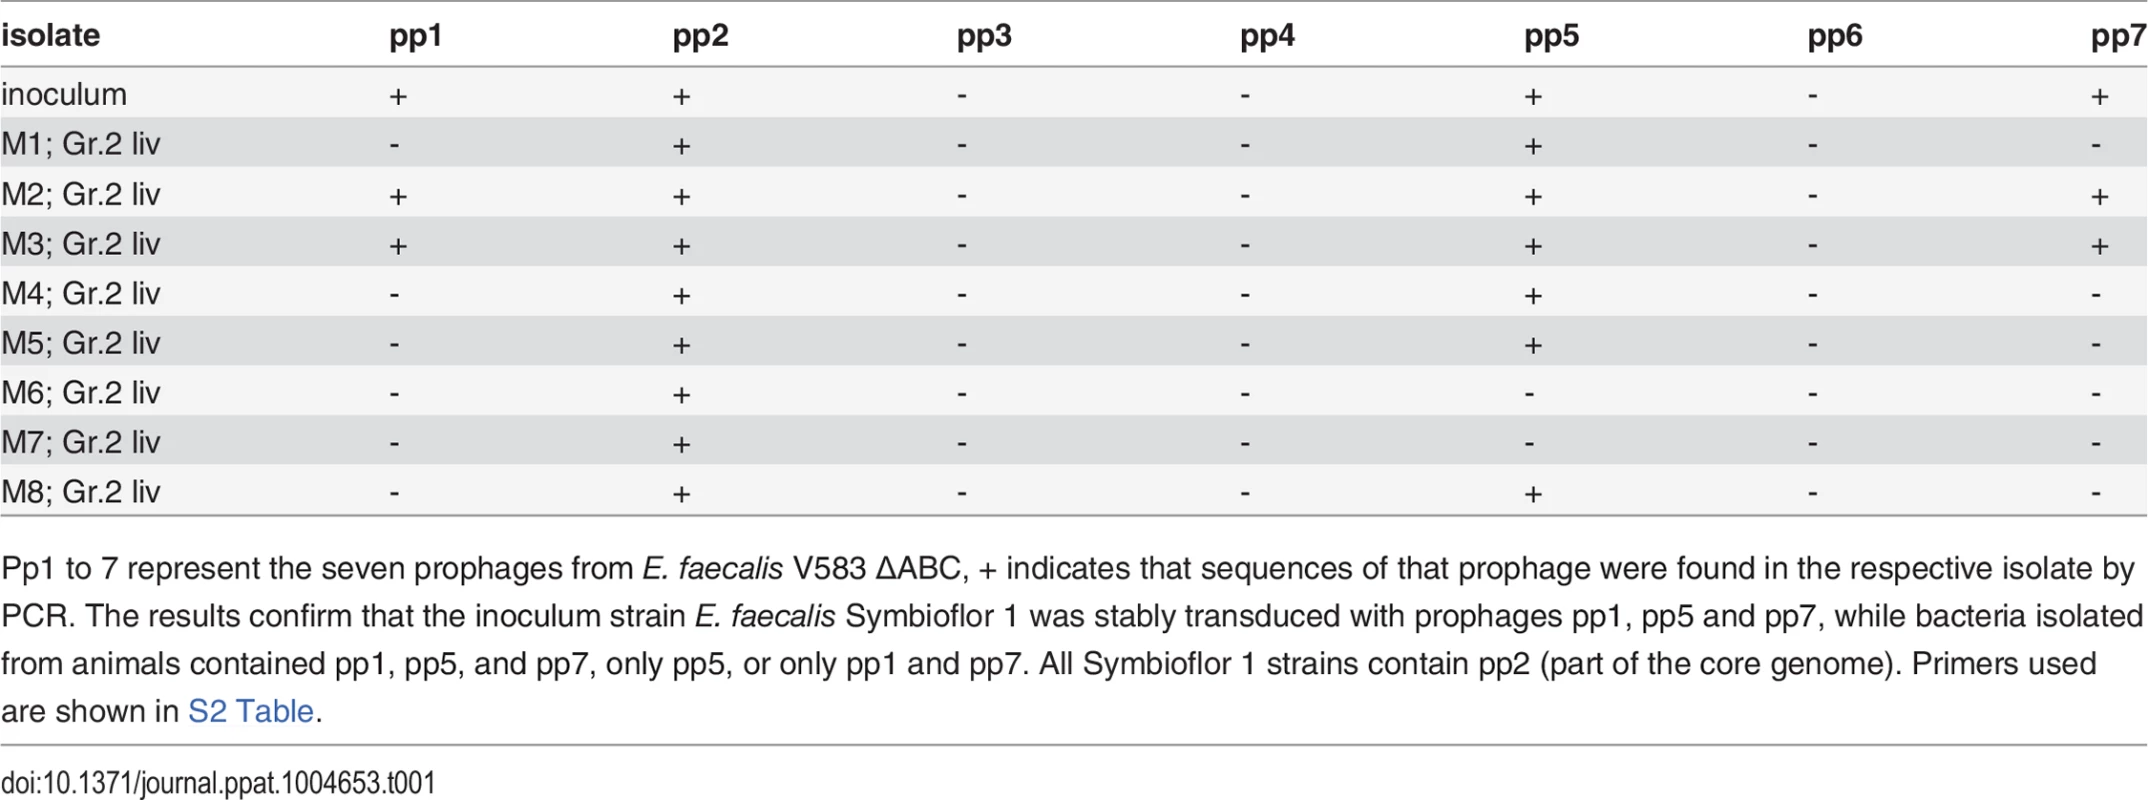 PCR results validating the presence or absence of phage sequences in the original <i>E. faecalis</i> Symbioflor 1, polylysogenic Symbioflor 1, and bacterial isolates from animals infected with polylysogenic Symbioflor 1.